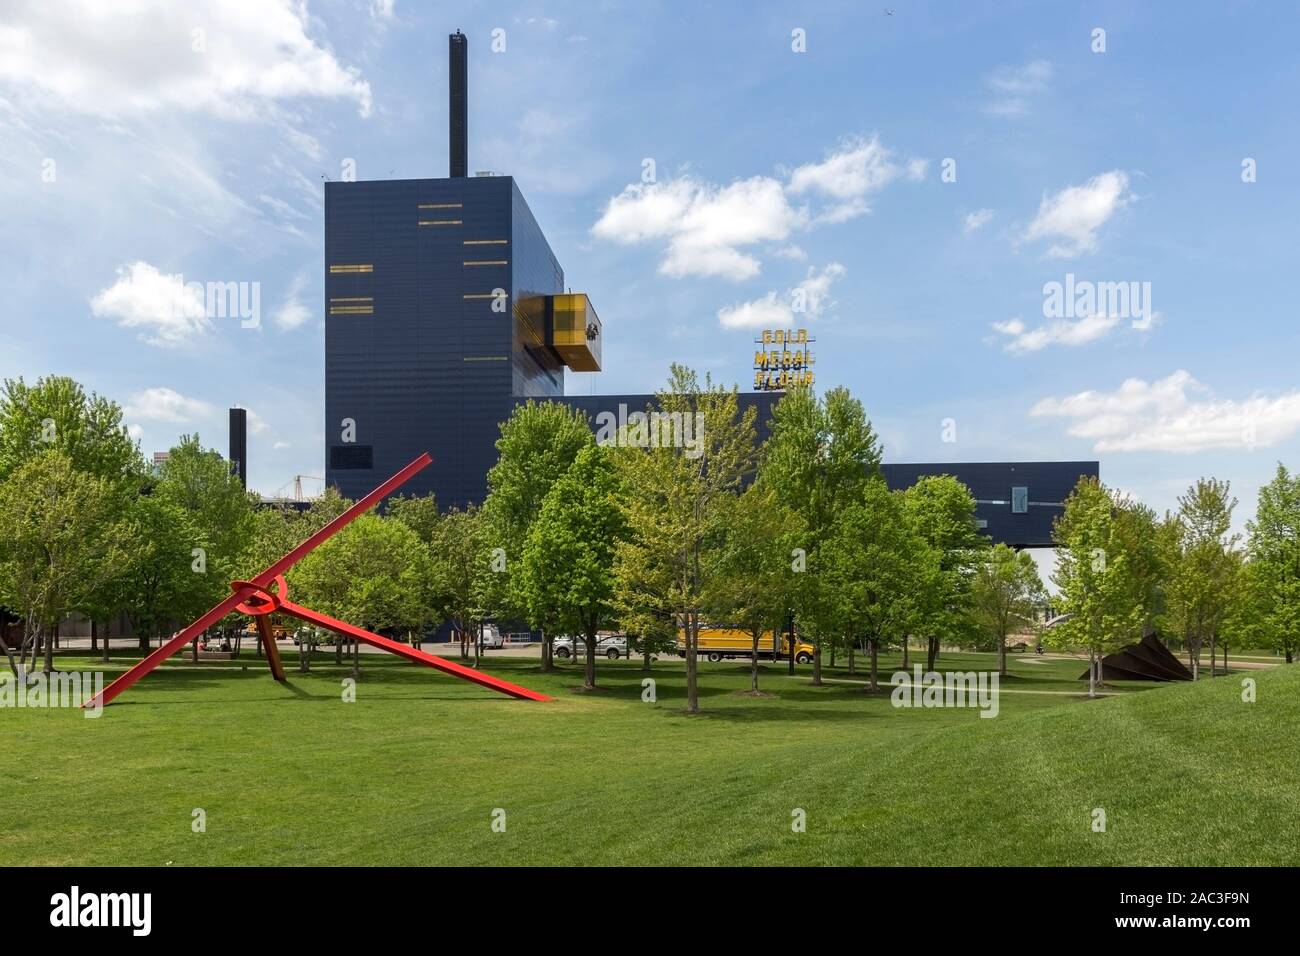 The Guthrie Theater and the 1977-1983 red metal painted sculpture Molecule by sculptor Mark di Suvero in Gold Medal Park in downtown Minneapolis, Minn Stock Photo